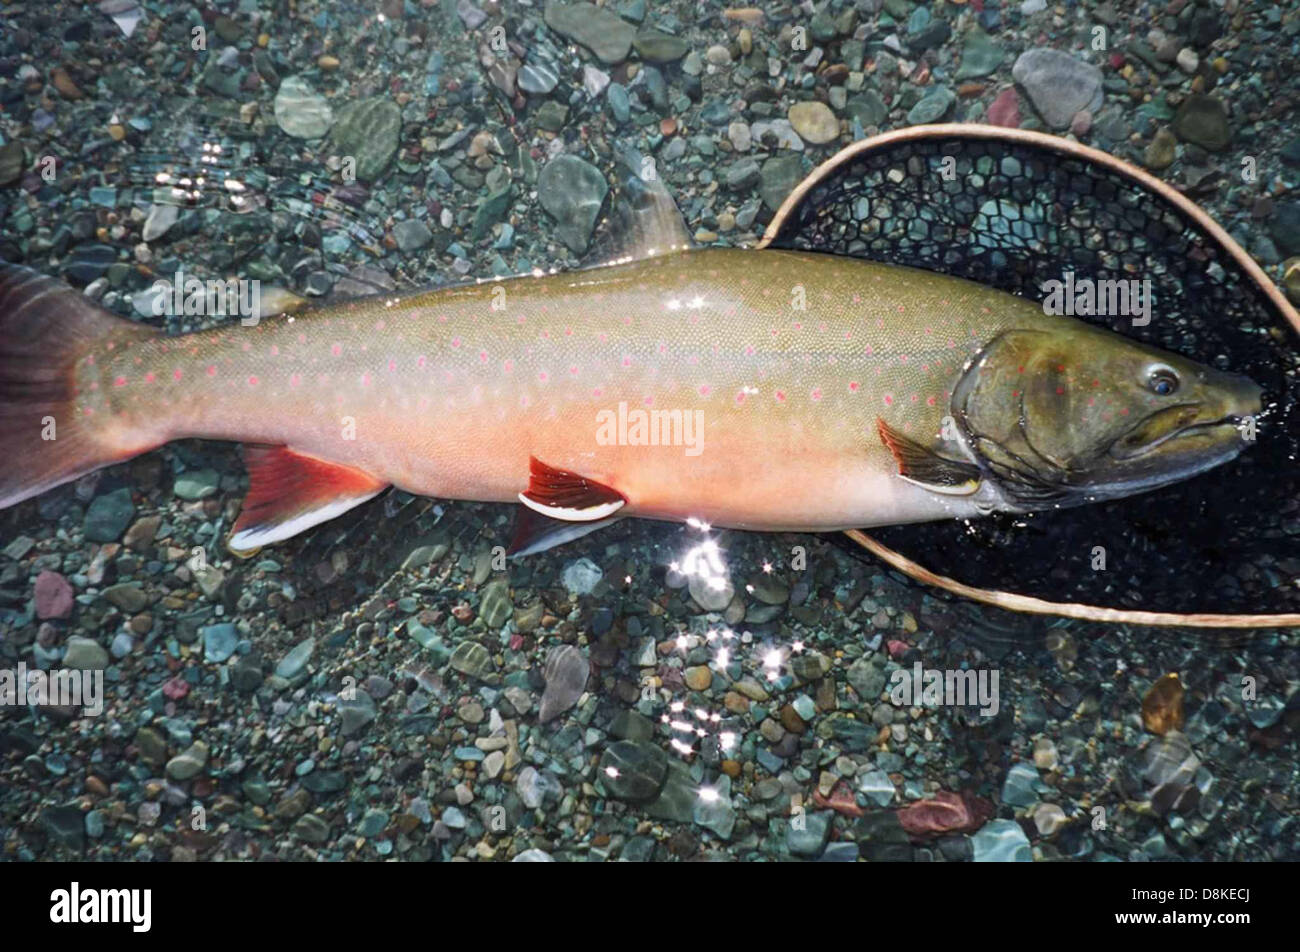 Bull trout fish on rocks by water salvelinus confluentus. Stock Photo